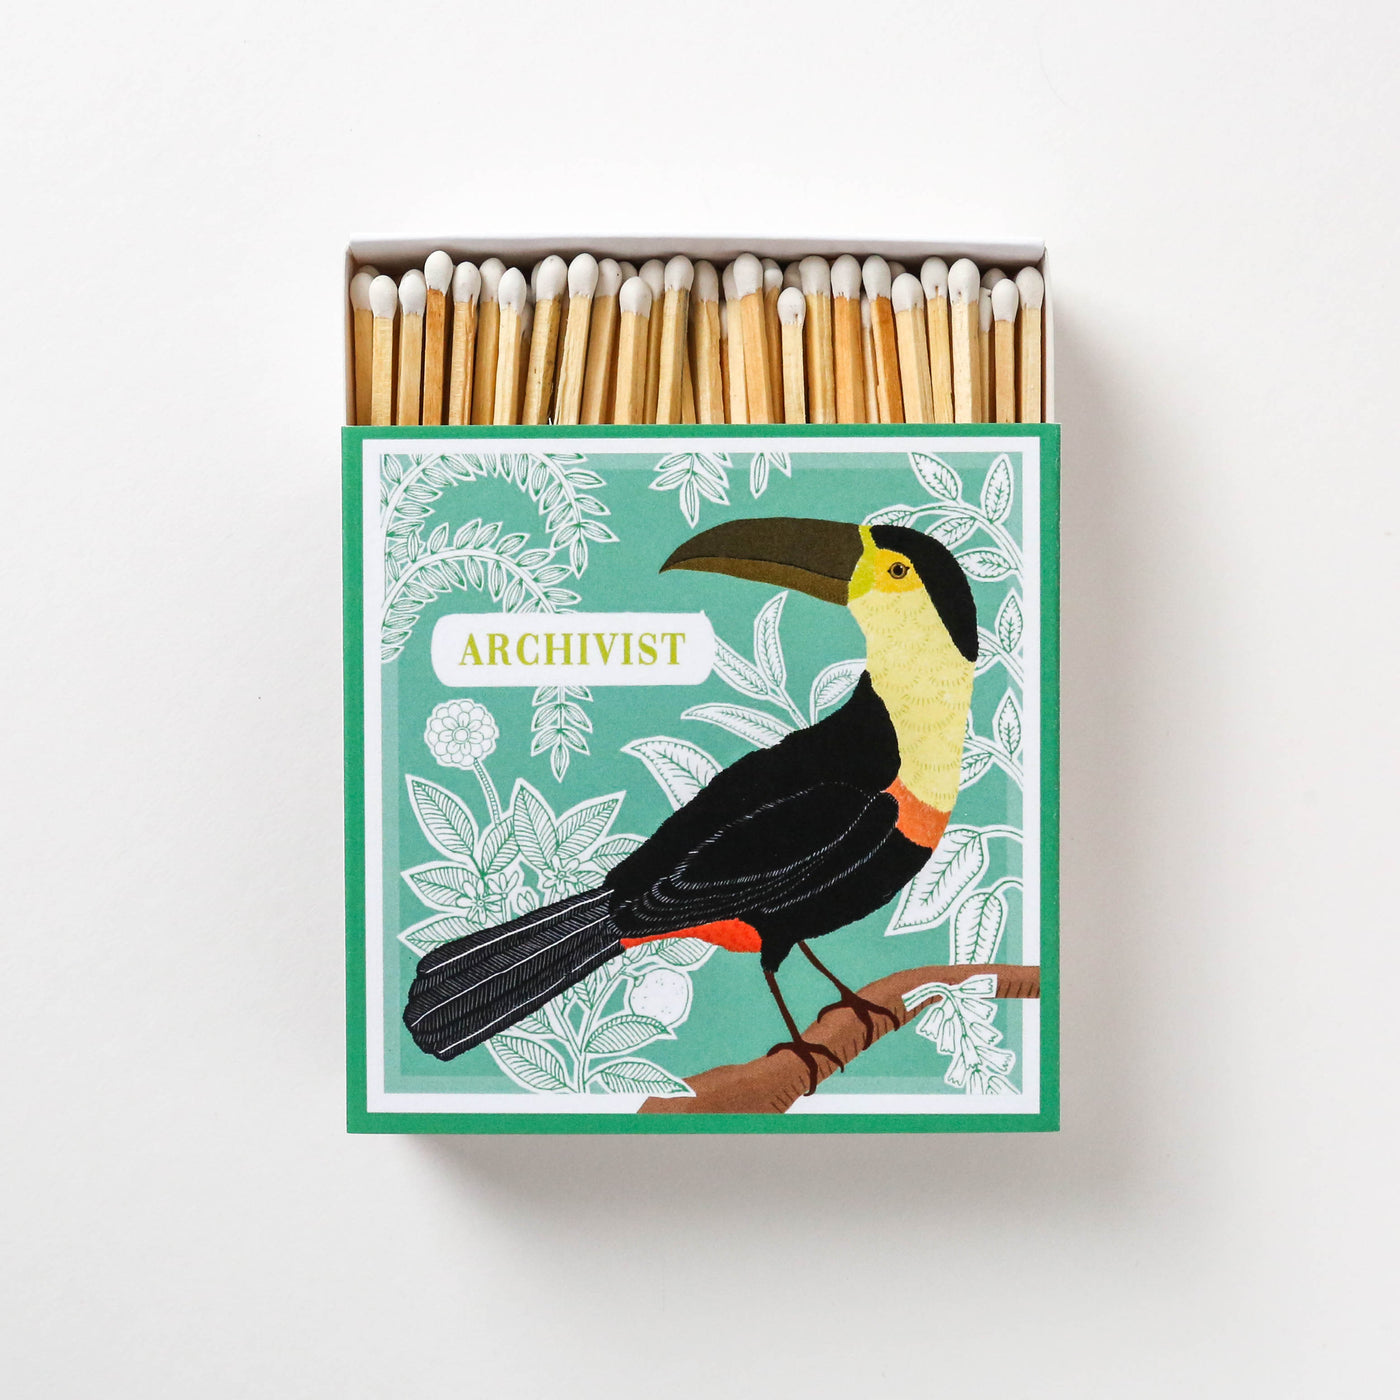 Ariane Butto Luxury Boxed Matches